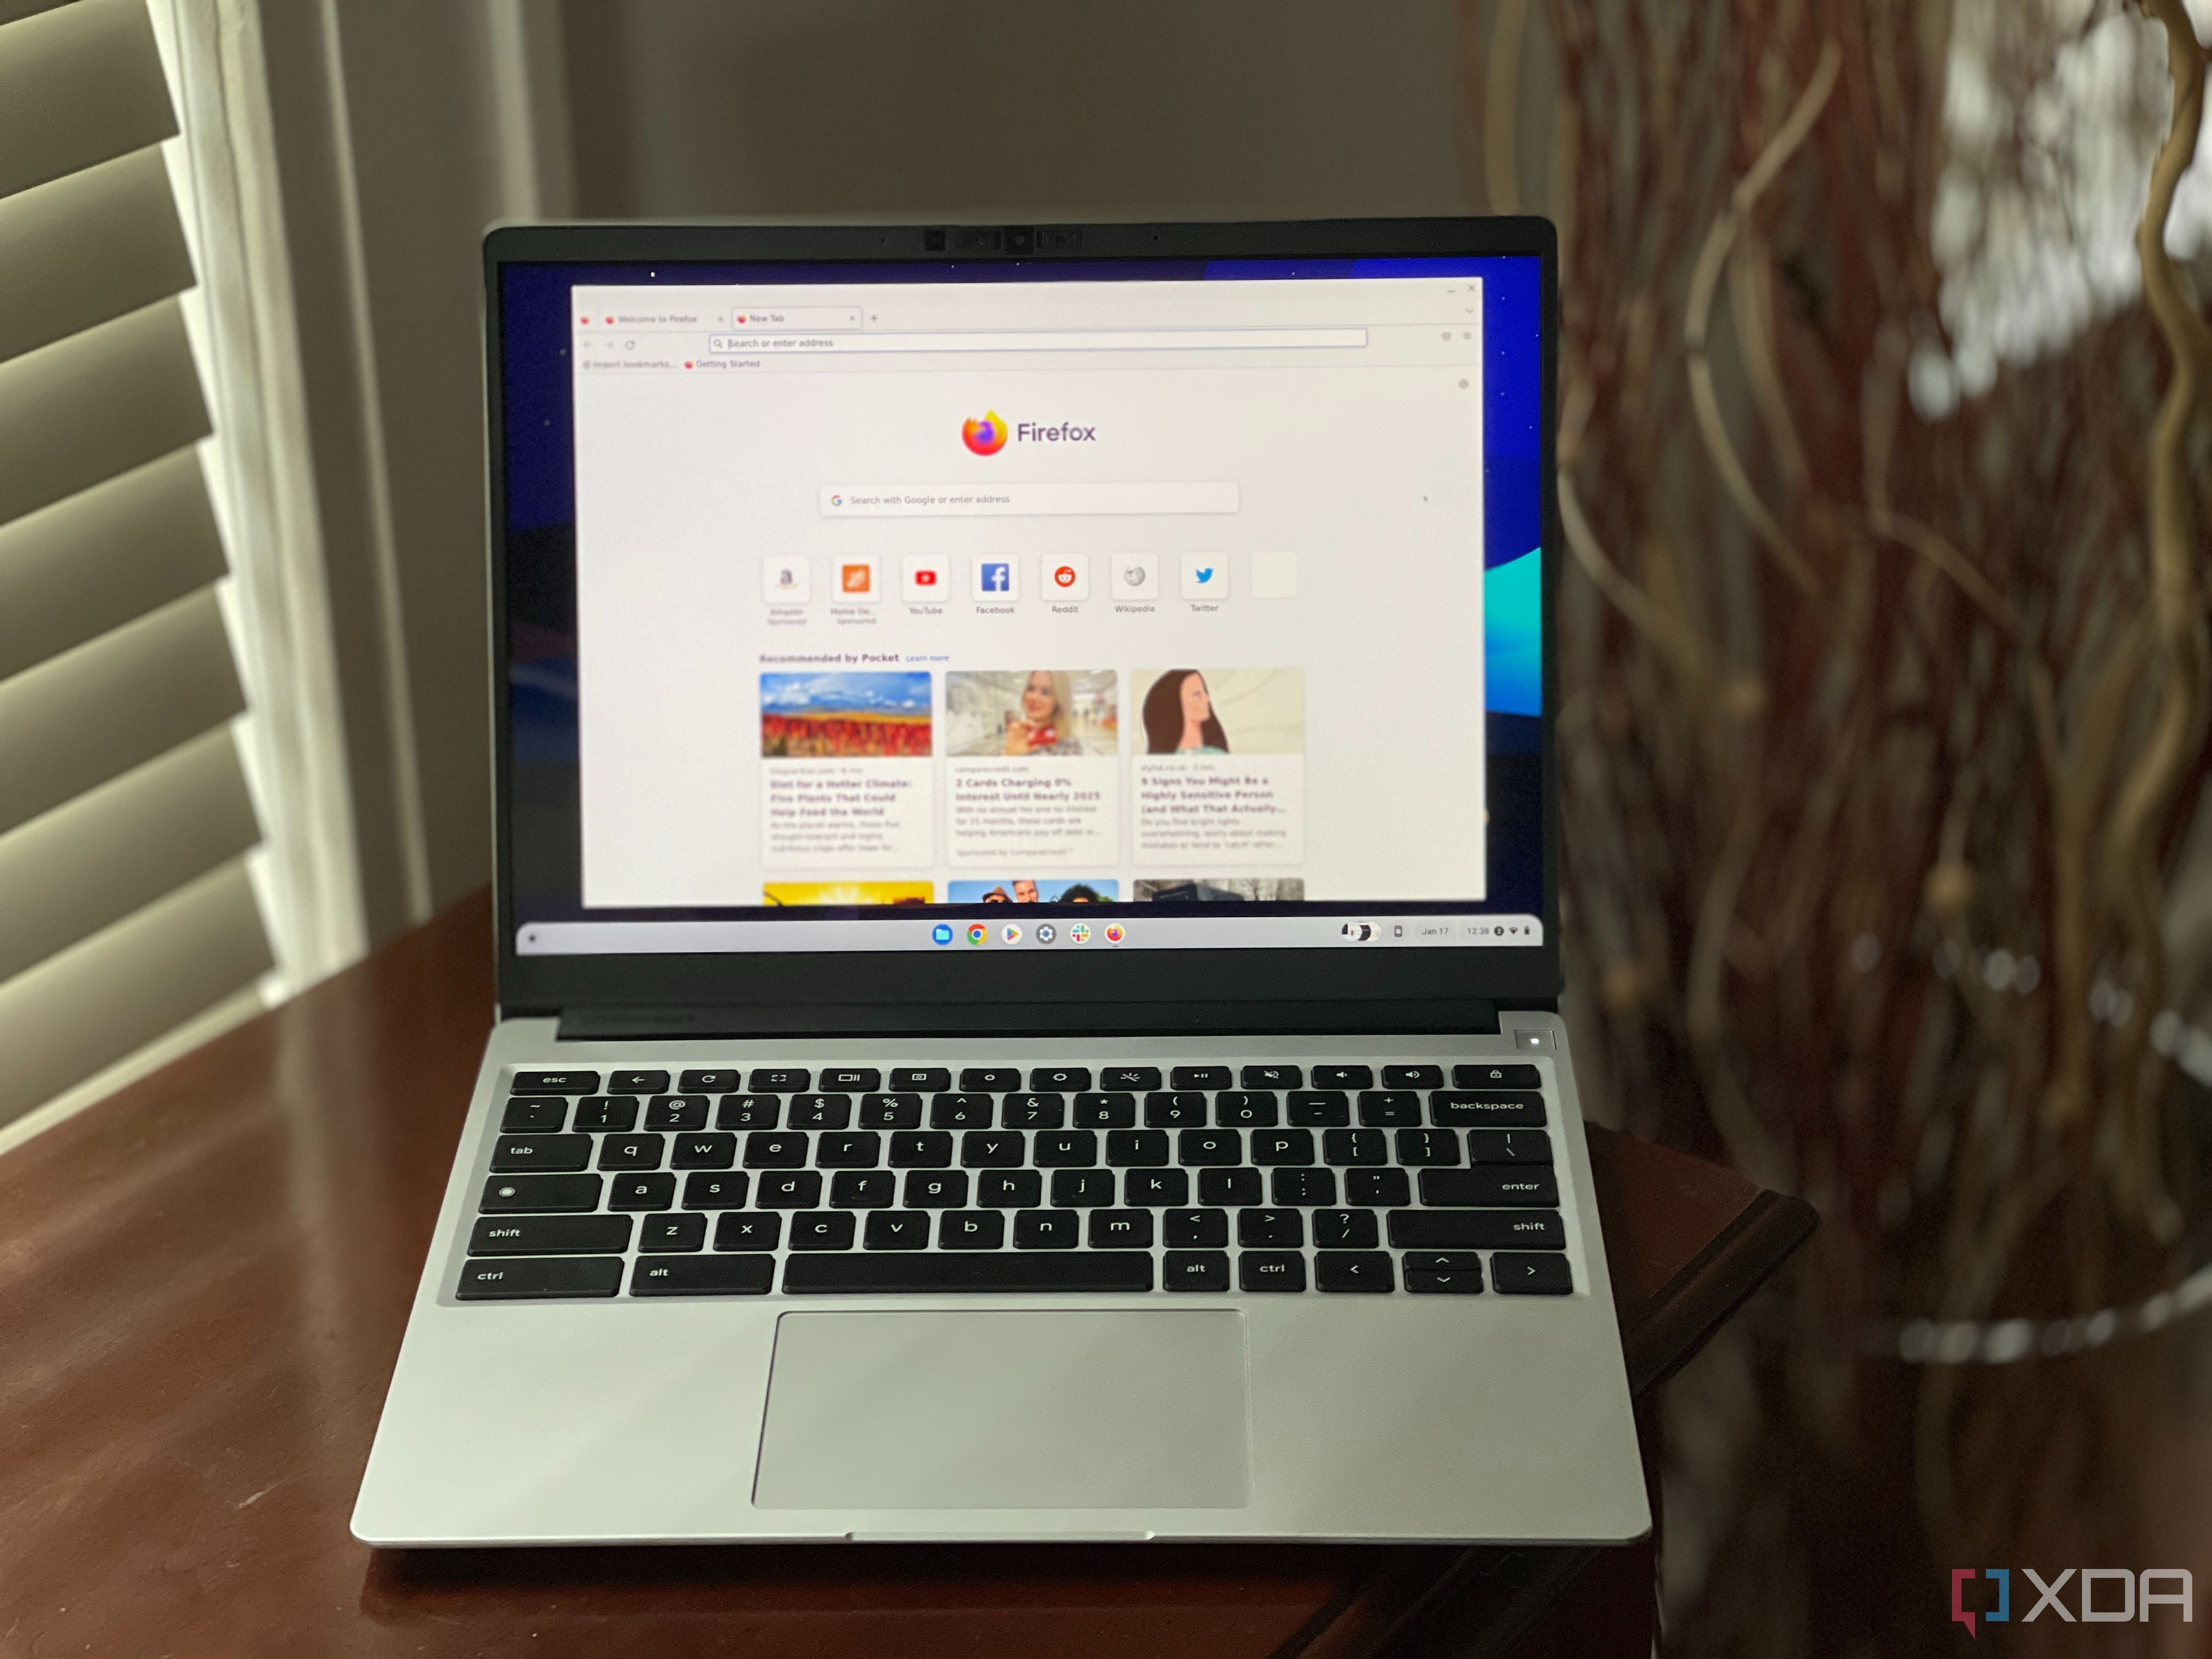 How to install and use Firefox on a Chromebook